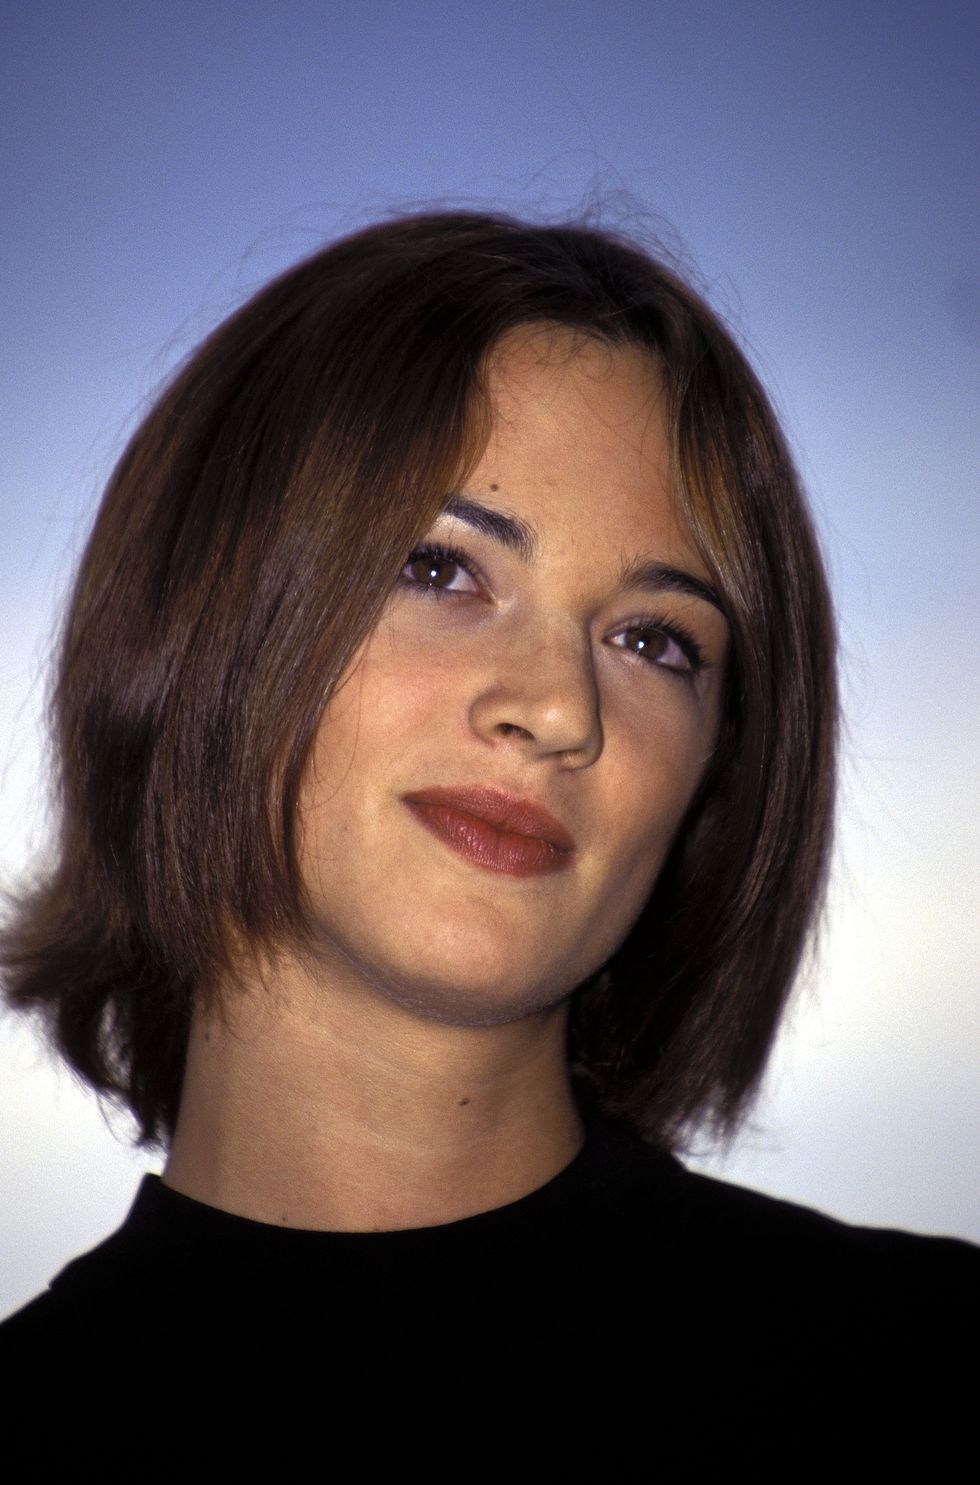 france   may 13  cannes 96 photo call campagna di viaggio in cannes, france on may 13, 1996 asia argento  photo by pool benainousduclosgamma rapho via getty images